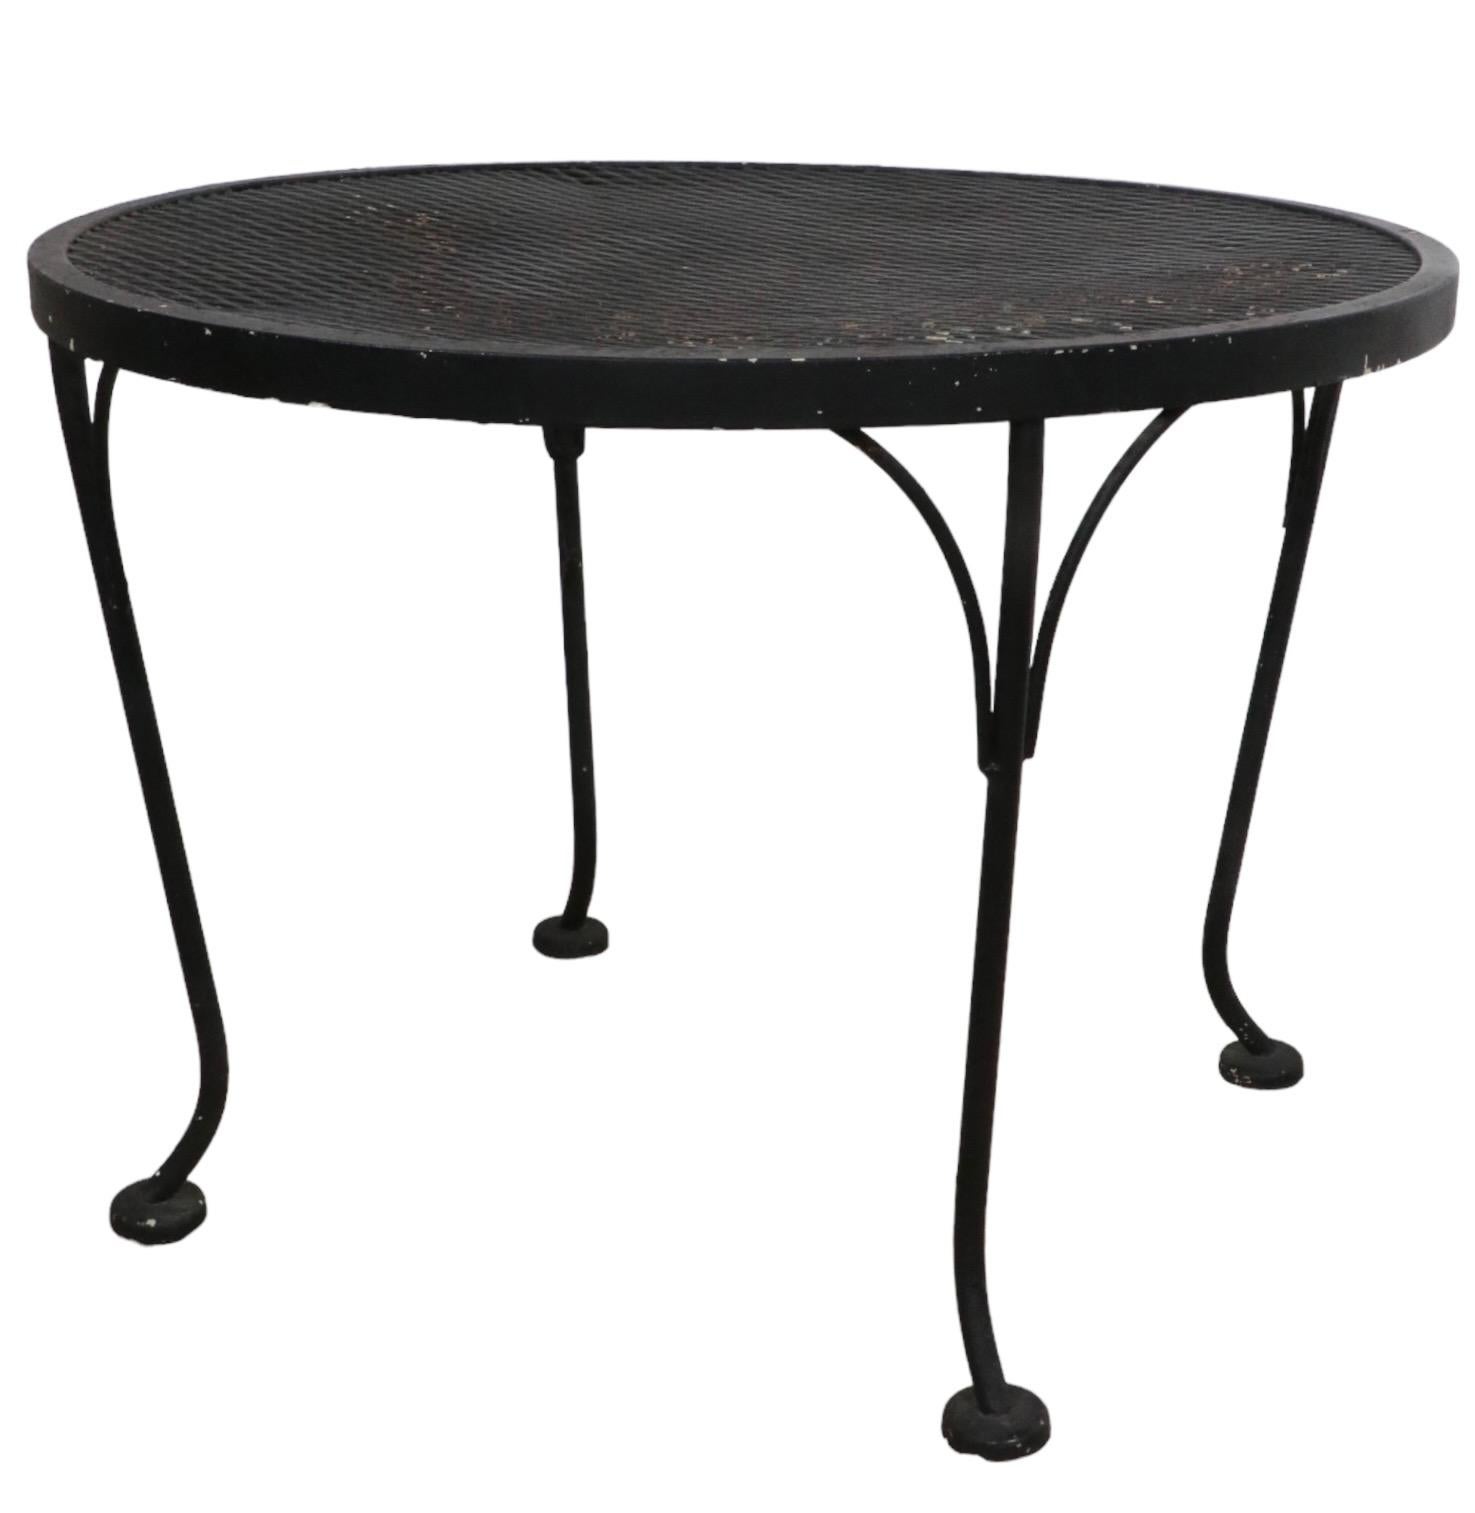 American Wrought Iron and Metal Mesh Garden Patio Poolside Side Tables by Woodard